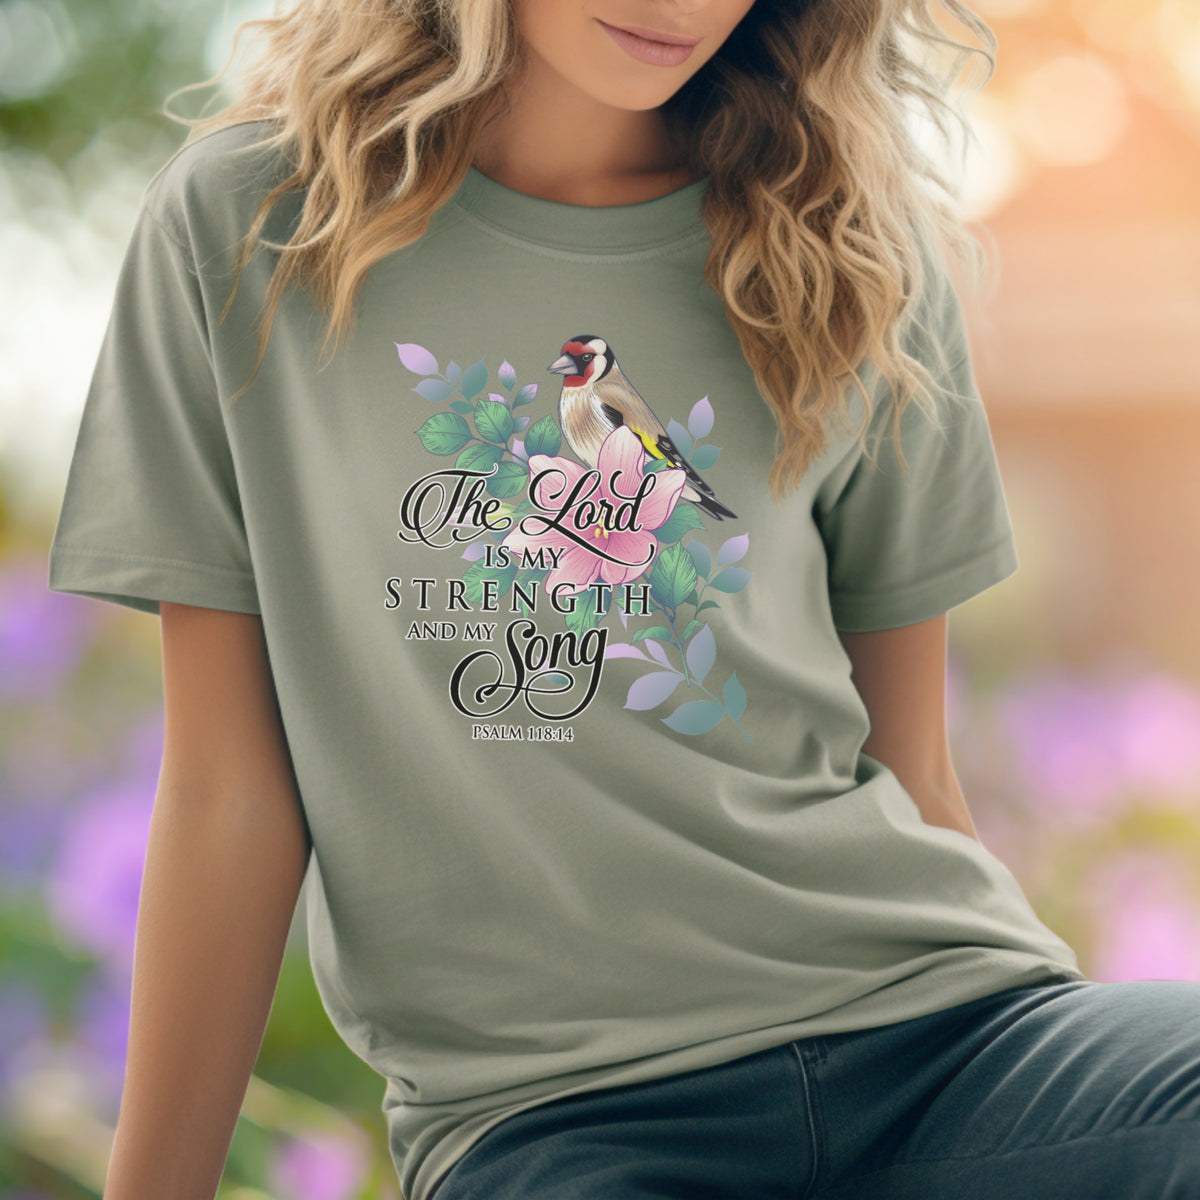 The Lord is my strength and My Song, Christian T-Shirts for women